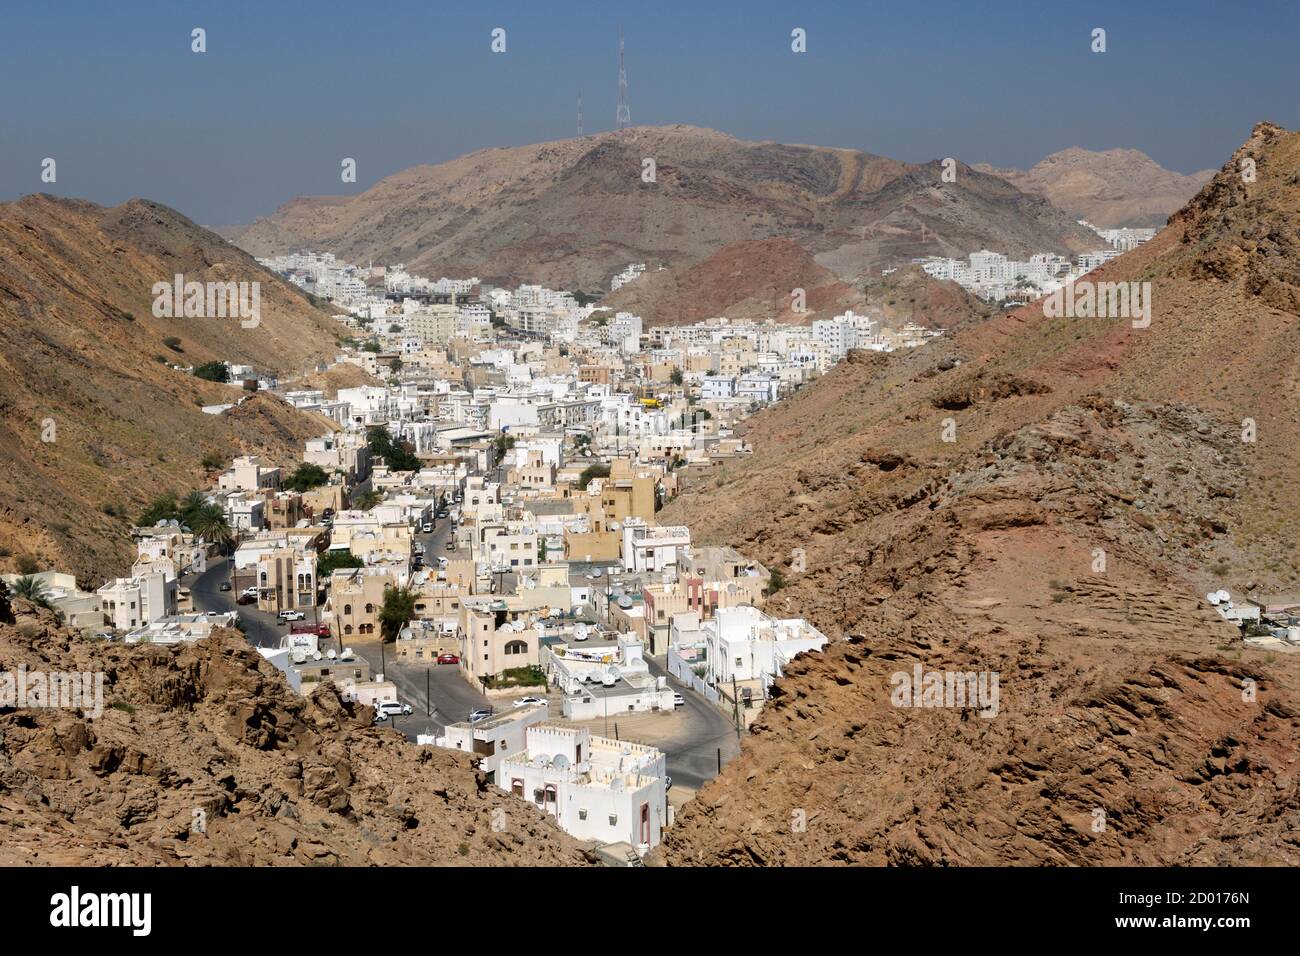 View of Al Hamria, a suburb of Muscat, the capital of the Sultanate of Oman. Stock Photo